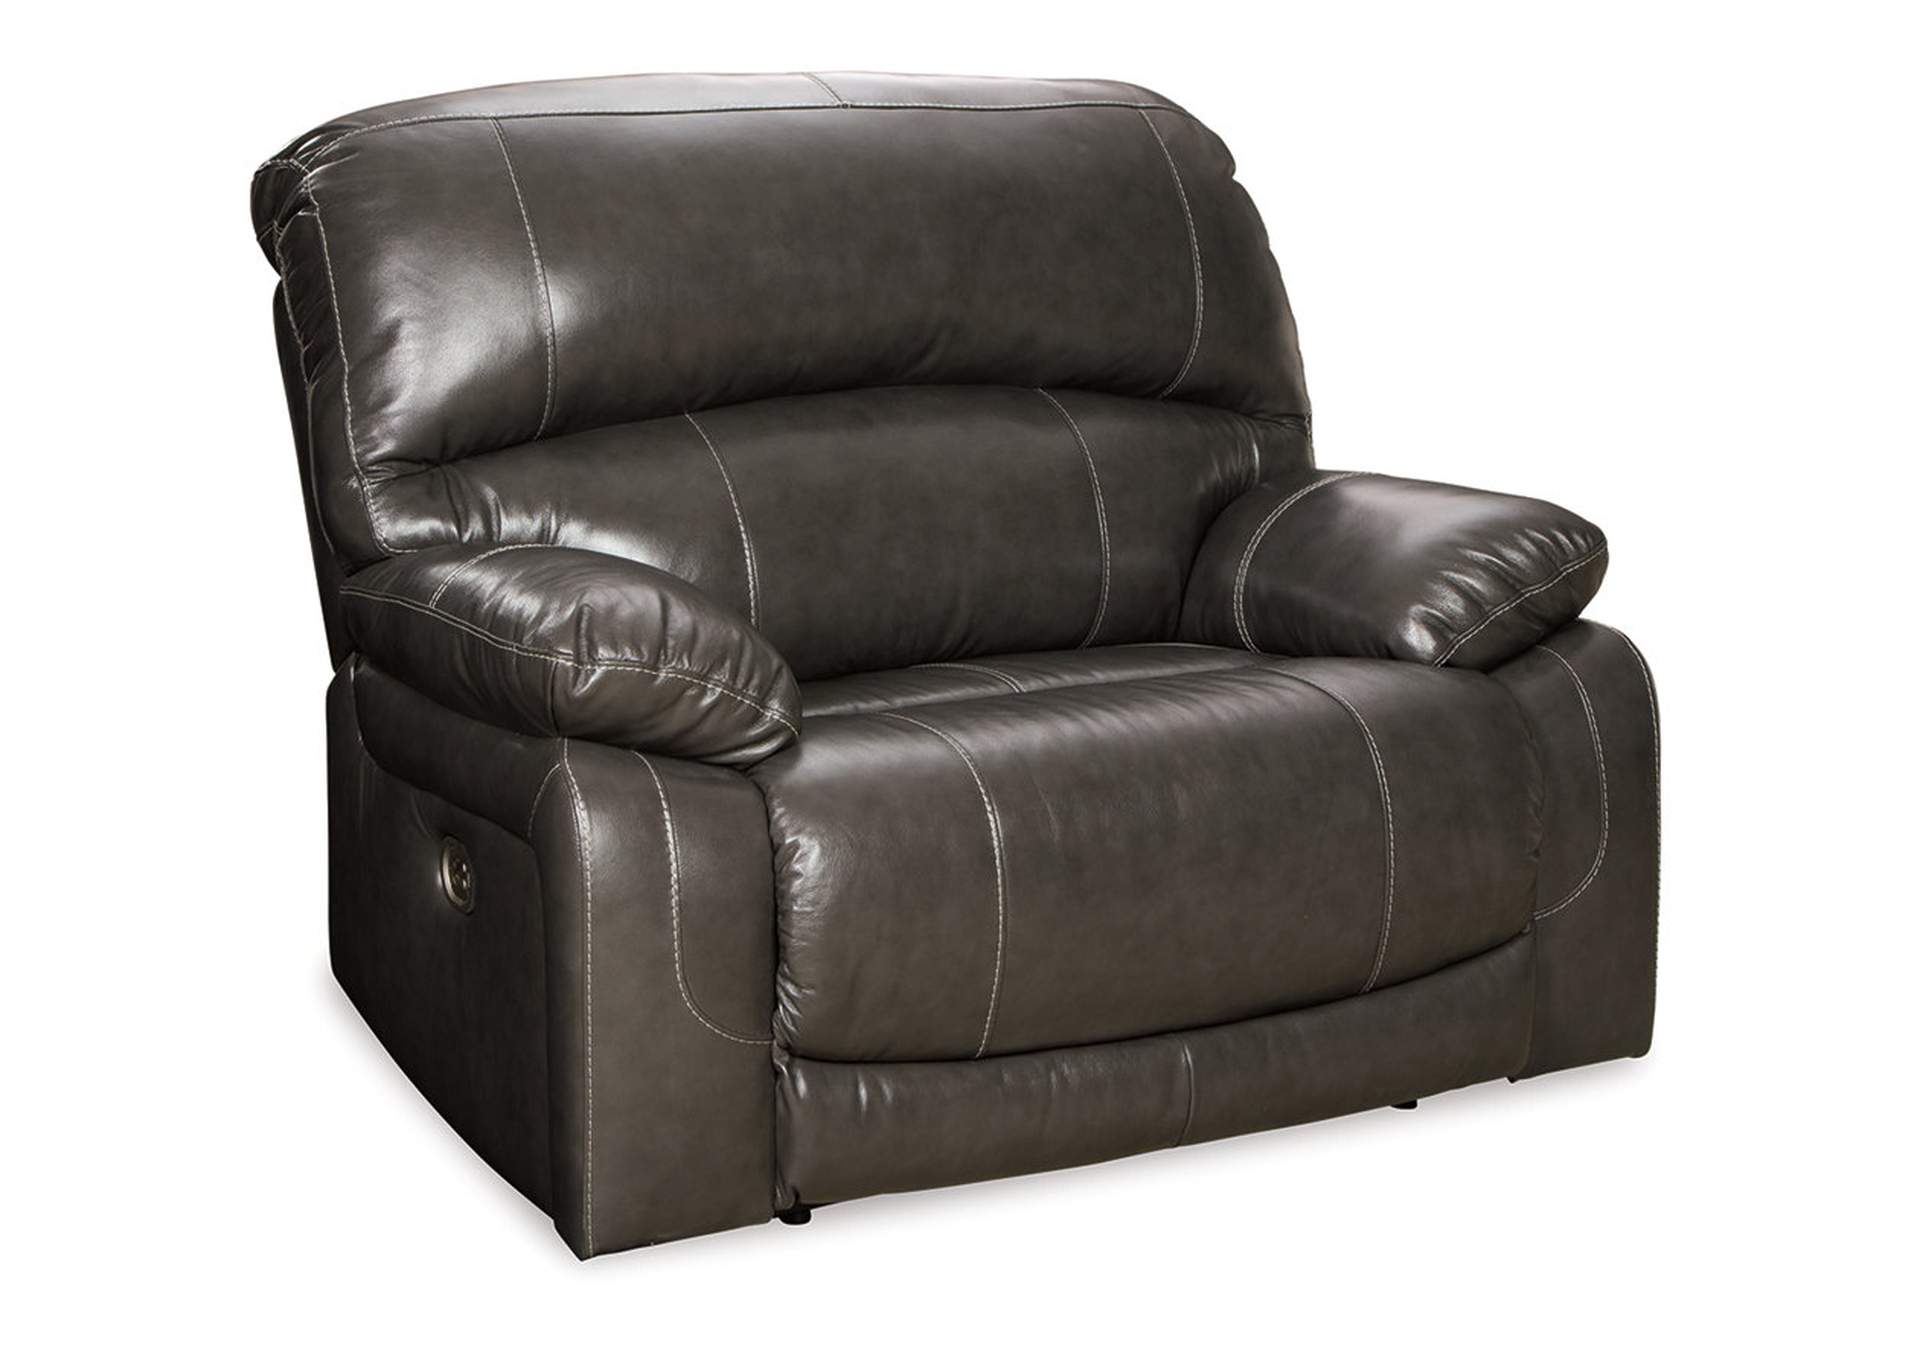 Hallstrung Oversized Power Recliner,Signature Design By Ashley